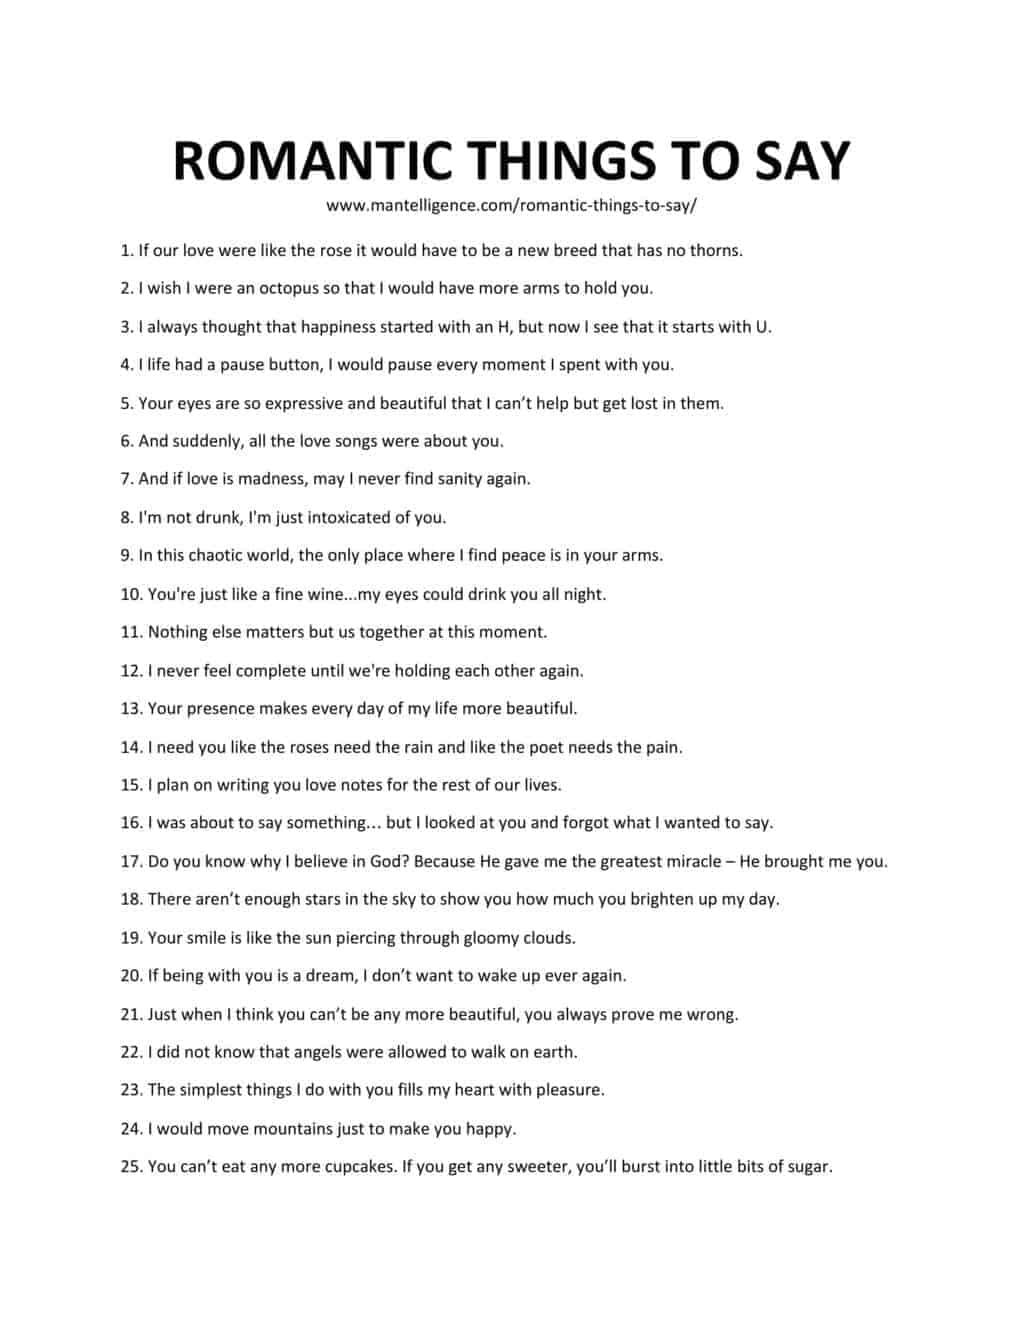 Downloadable and printable list of romantic things to say as pdf or jpg